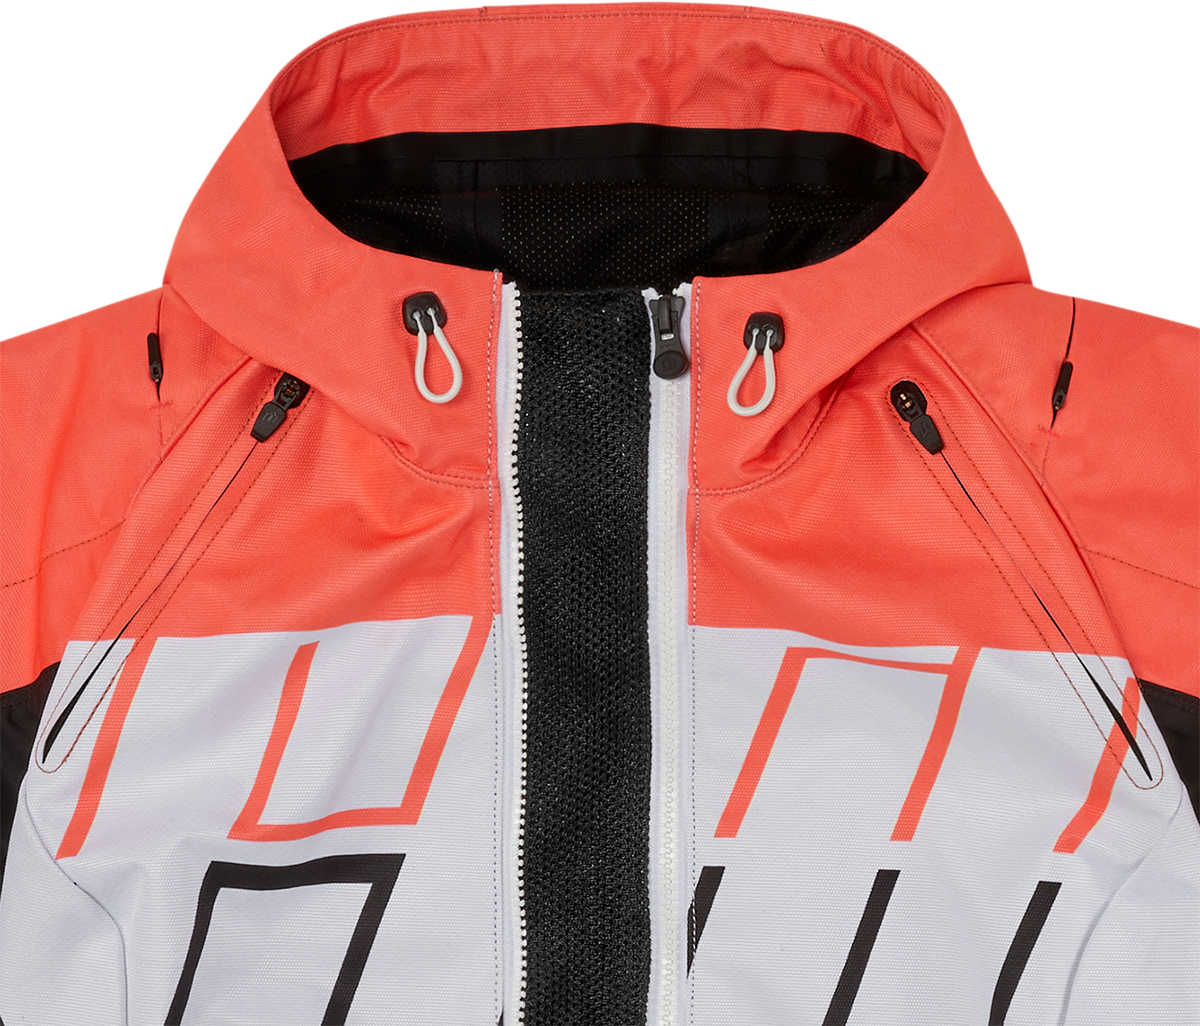 ICON Women's Airform Retro Jacket - Coral - Small 2822-1406